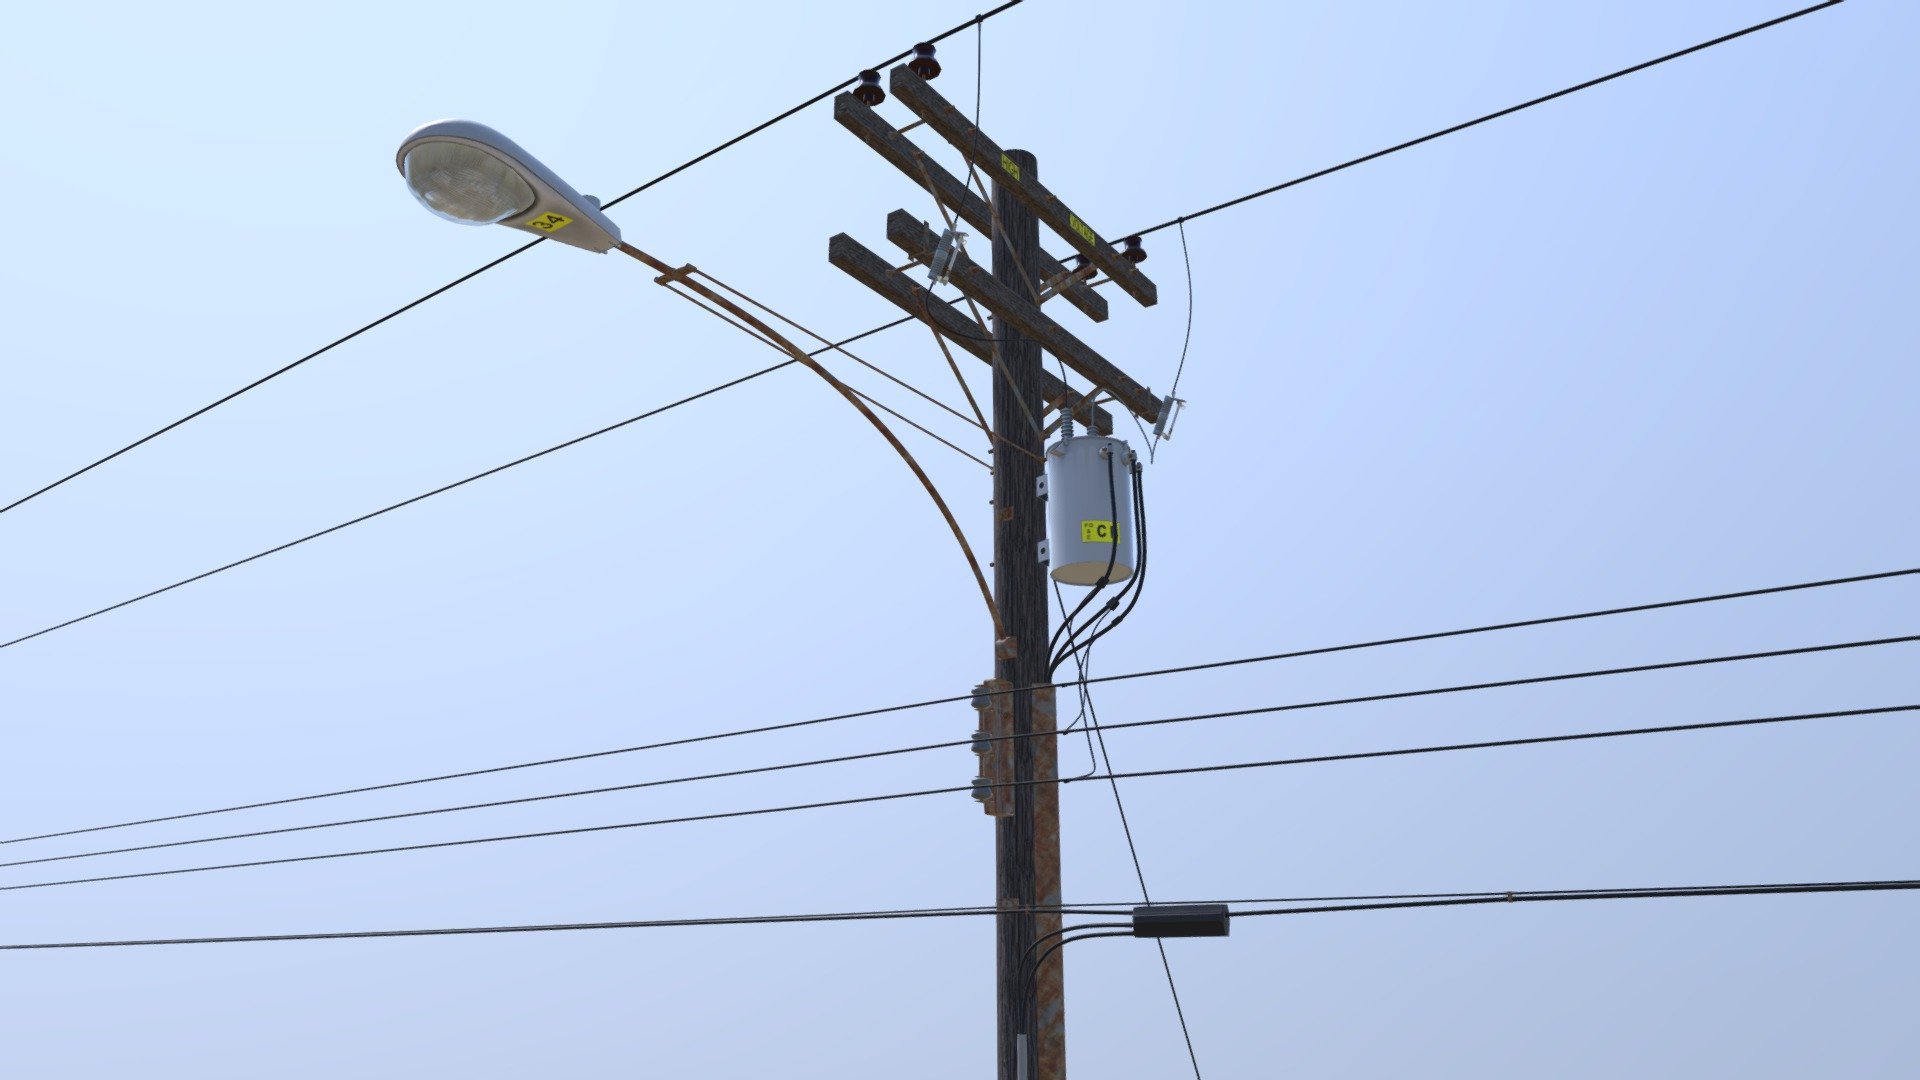 Utility Pole prop created for the Crenshaw level in the game Urban Terror 5 running on the Unreal 4 game engine
http://www.urbanterror.info - Utility Pole - 3D model by joemauke 3d model